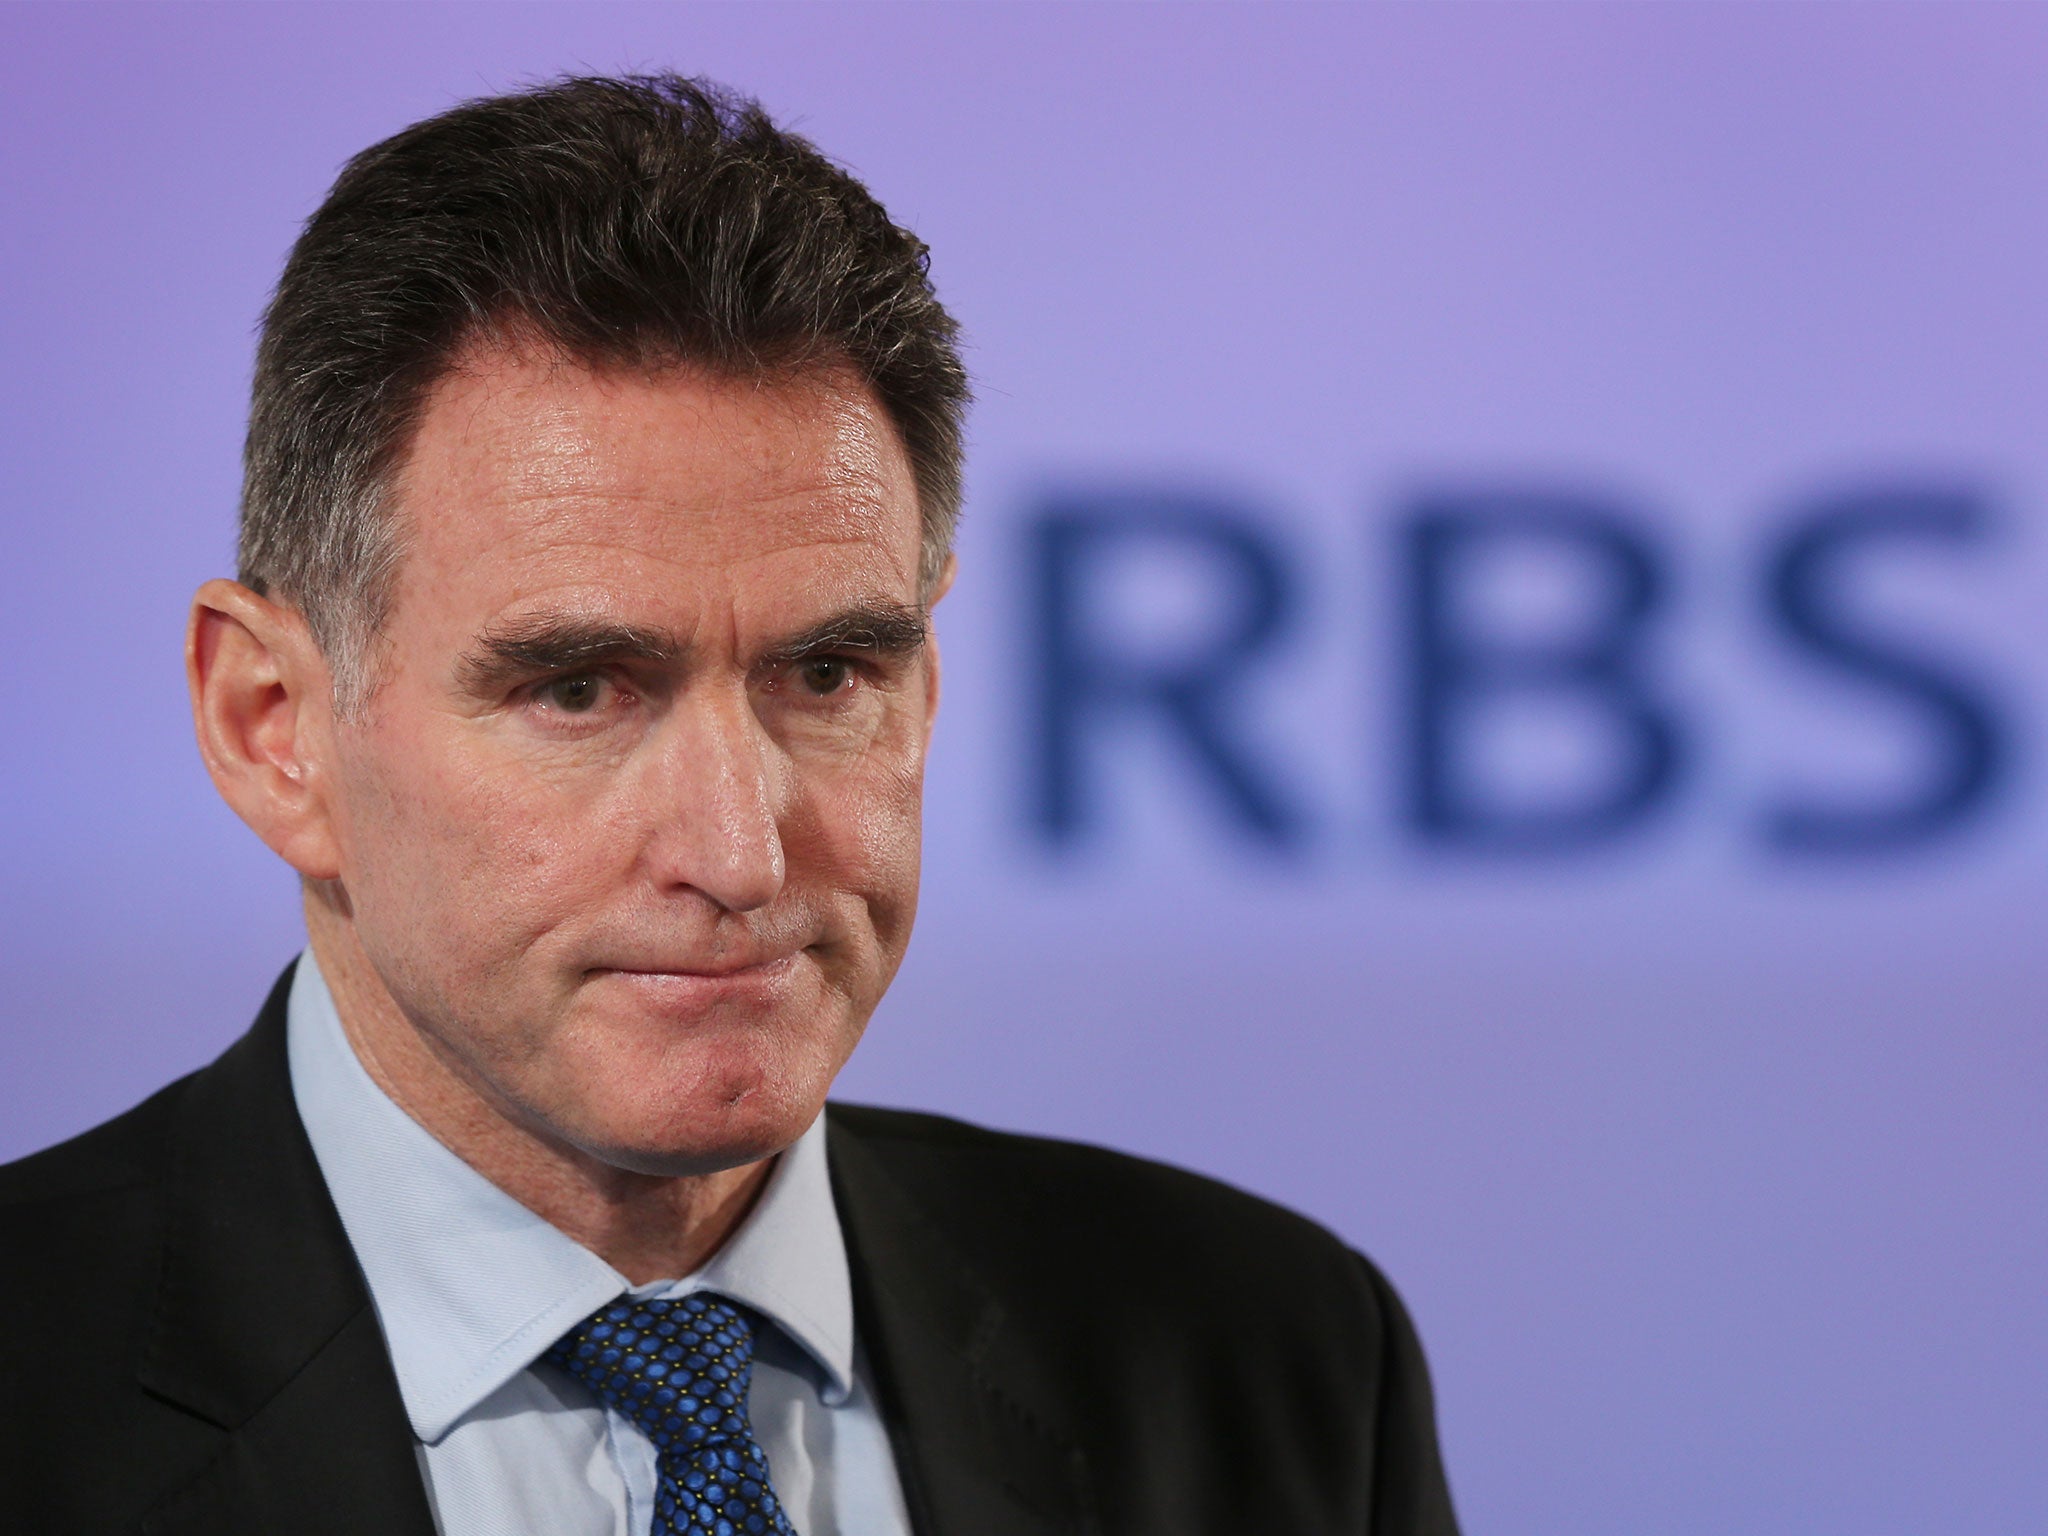 Ross McEwan, CEO of RBS, speaks to reporters and investors in February 2014 following the bank's announcement of a pre-tax loss of £8.2bn for the previous year, the biggest since the bank was rescued by the UK tax payer